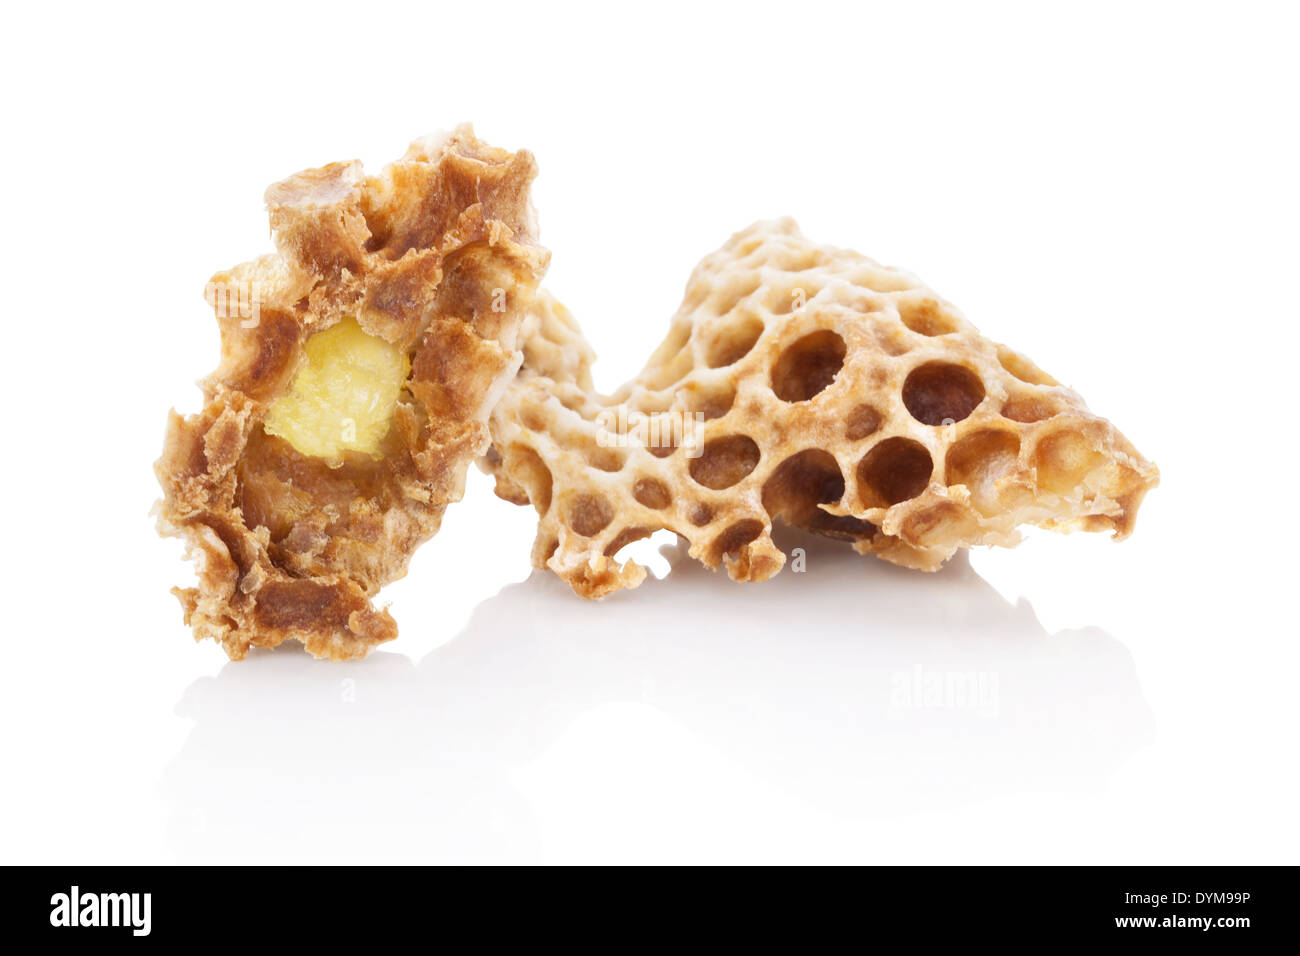 Royal jelly in honeycomb isolated on white background. Beauty and antiaging concept. Organic and natural cosmetics. Stock Photo